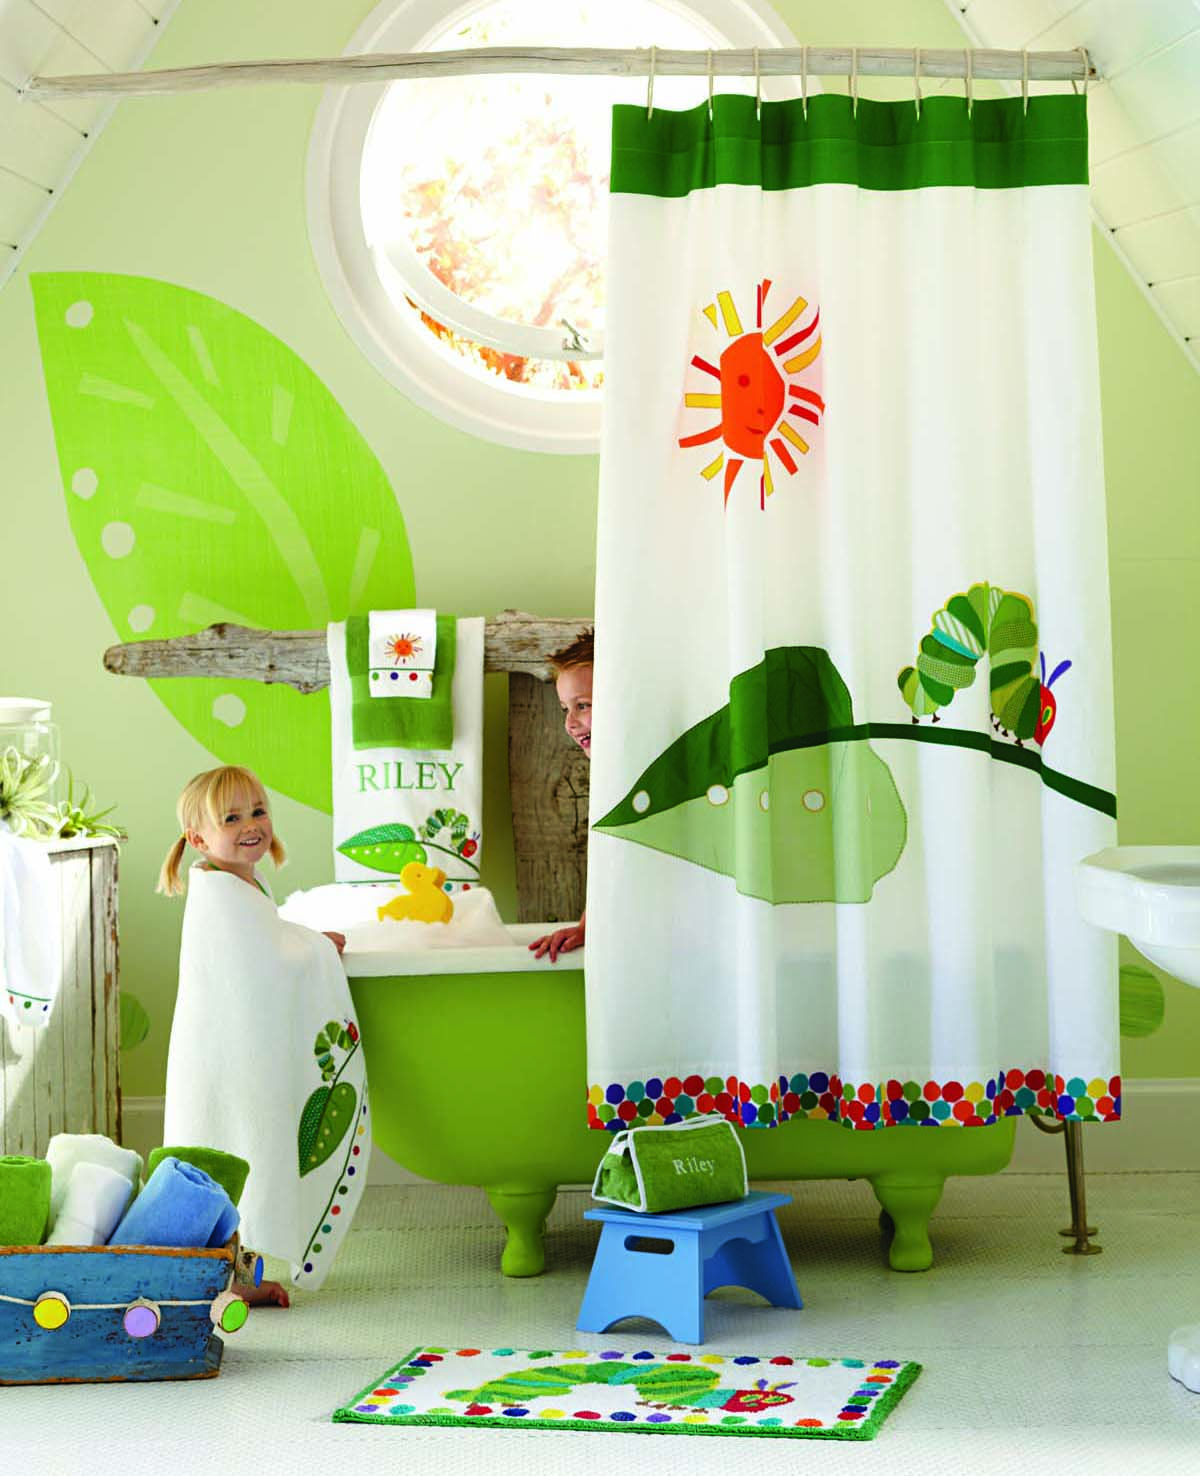 The very hungry caterpillar bathroon lifestyle